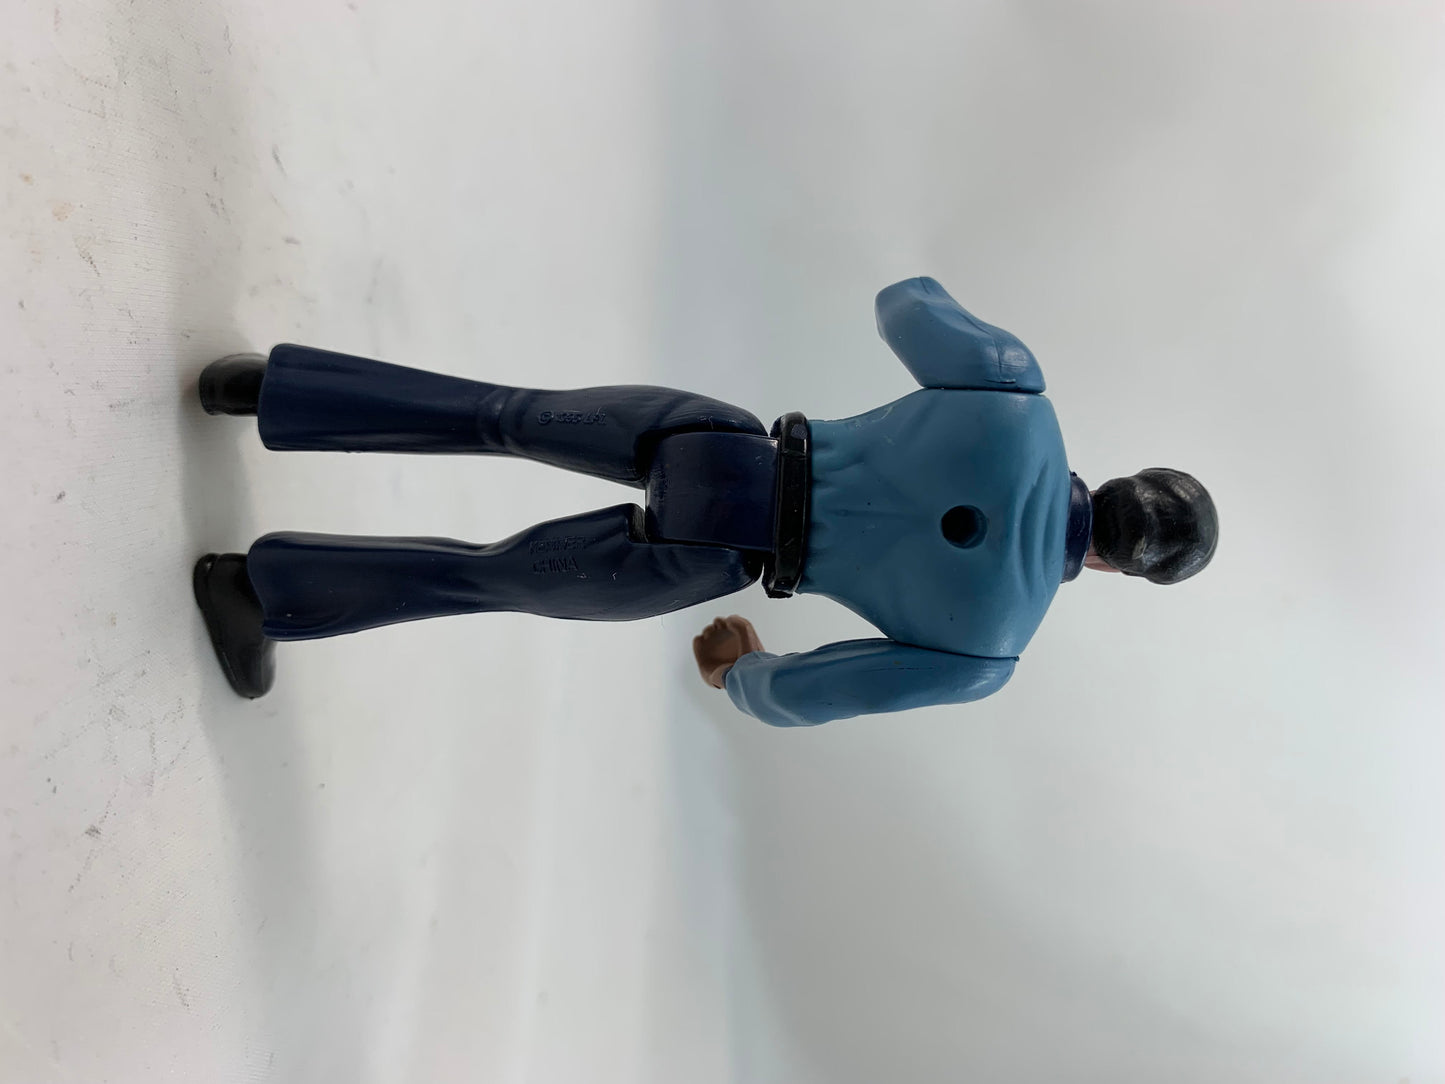 Kenner Star Wars: Power of the Force POTF 2 Lando Calrissian COO LFL 1995 Made in China - Loose